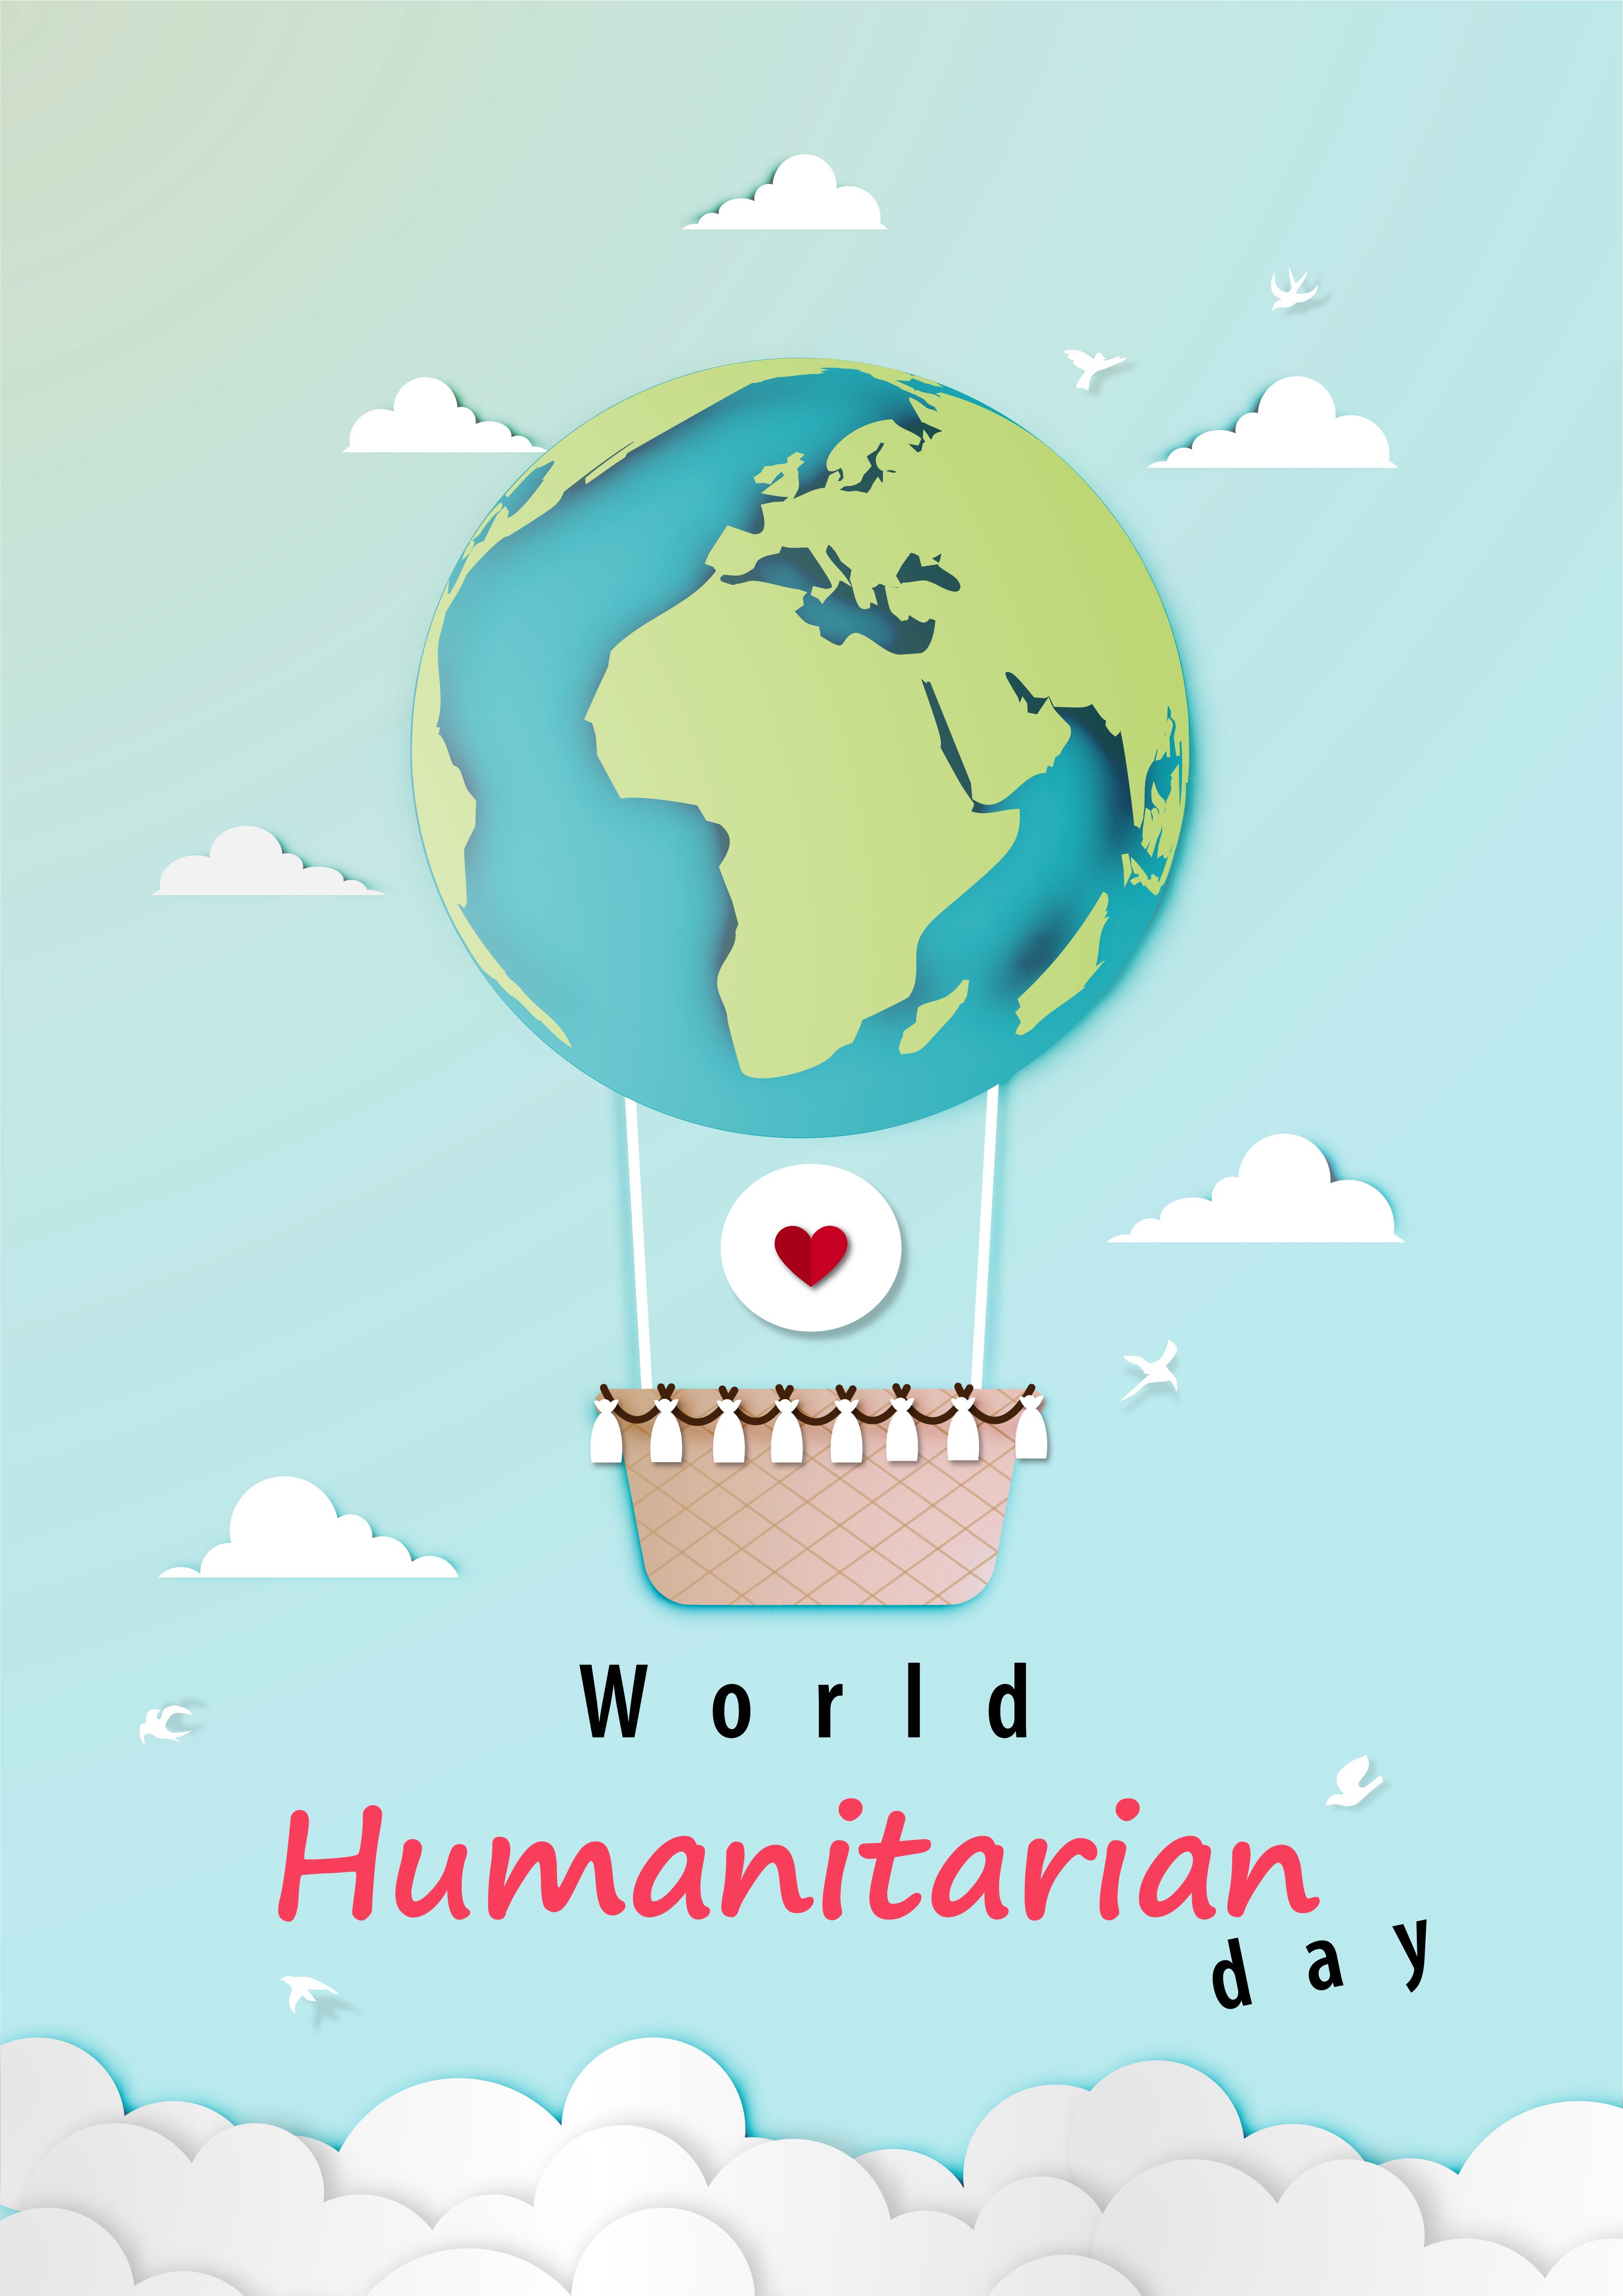 Paper art World Humanitarian day design with planet balloon